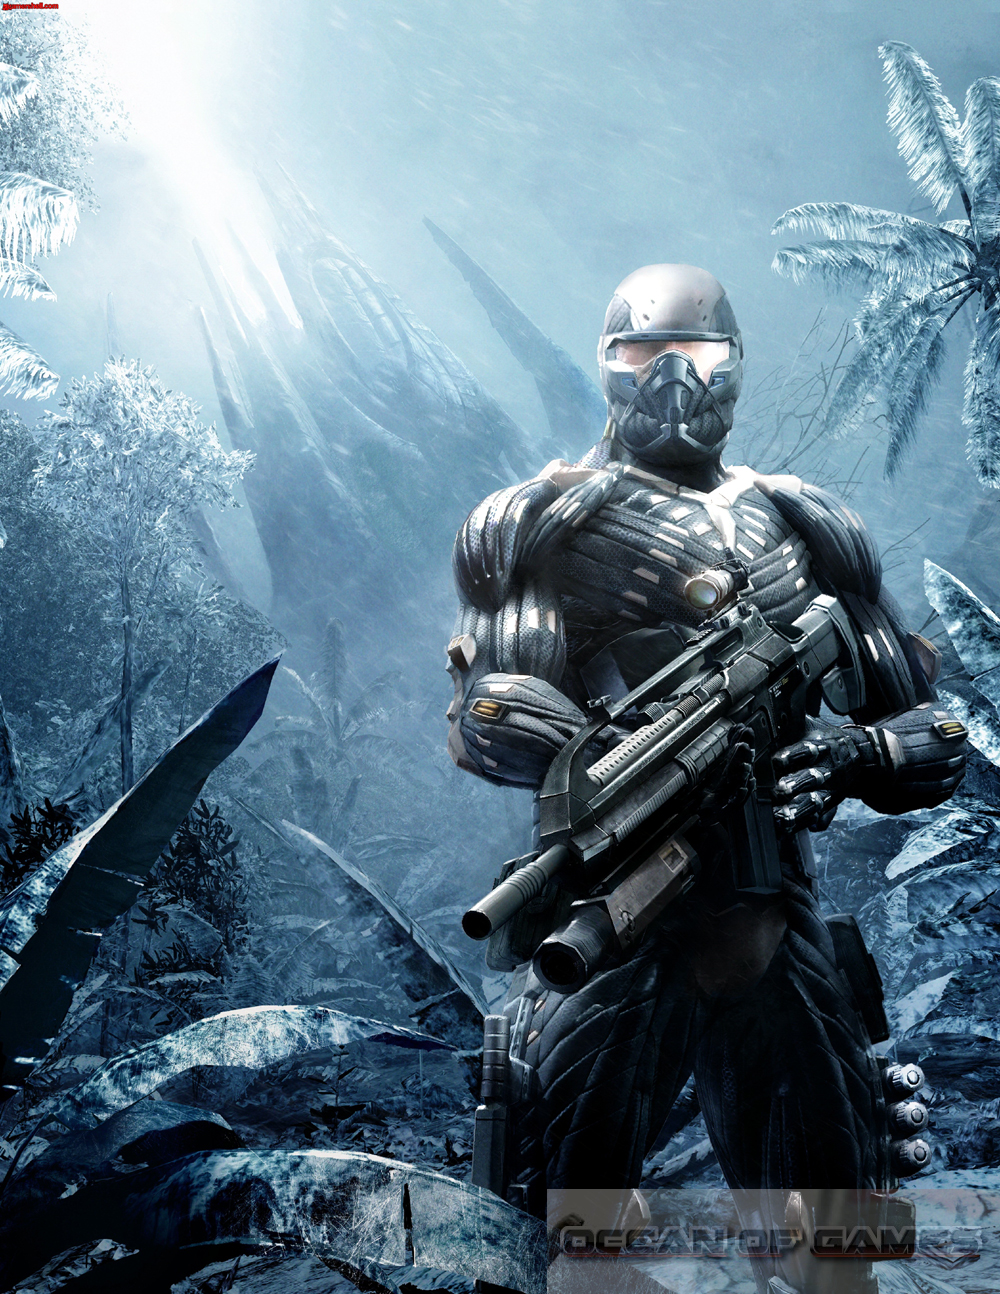 Crysis Features